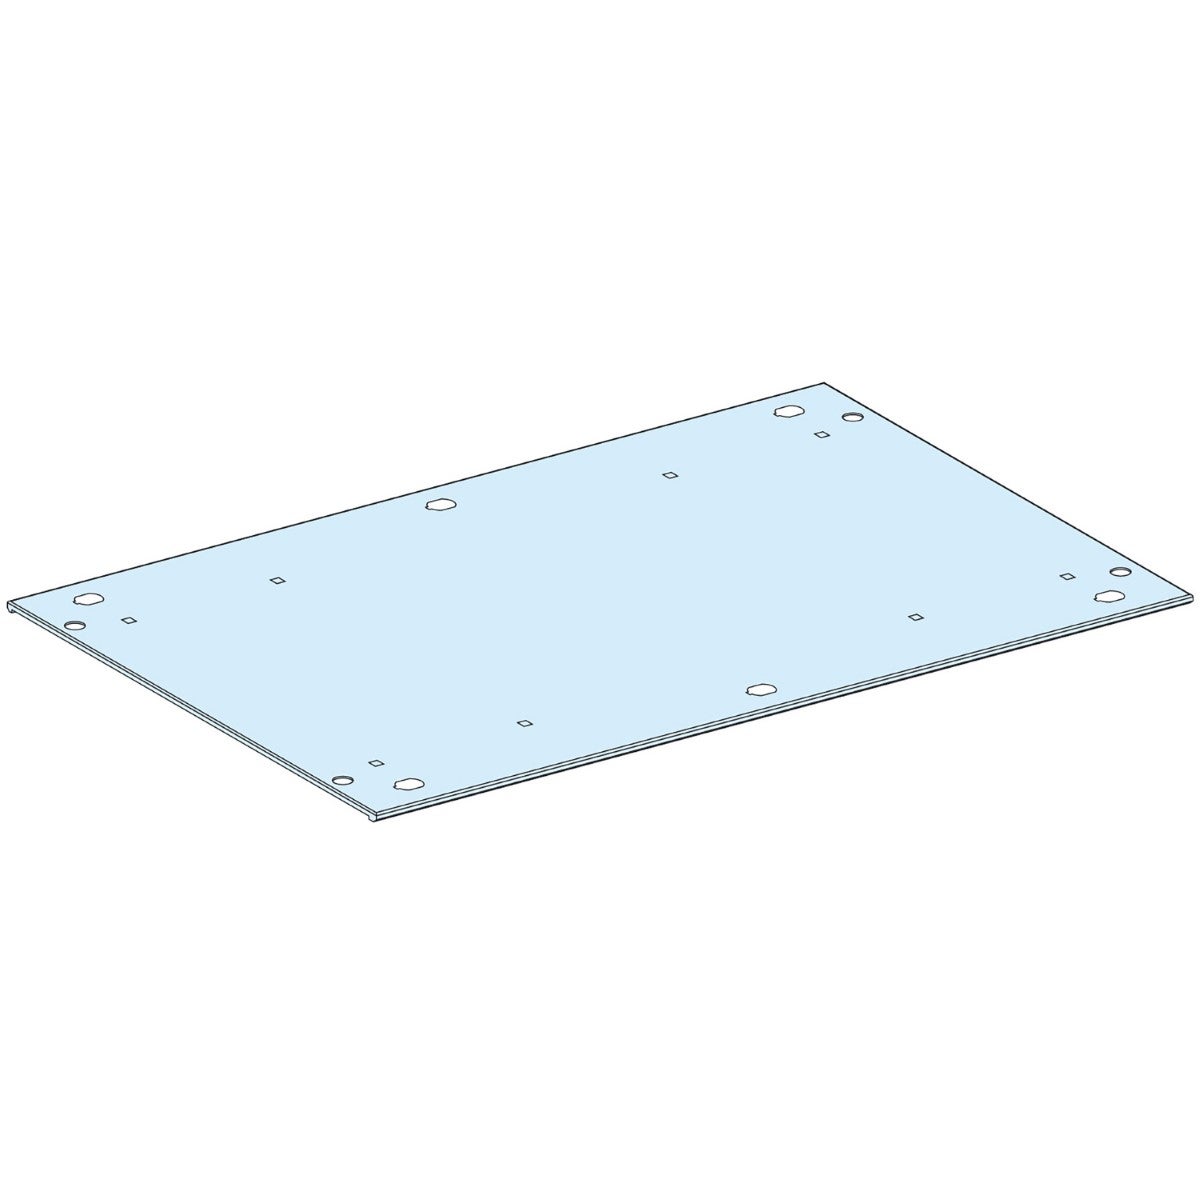 Roof plate, PrismaSeT P, for enclosure, W800mm, D600mm, IP30, white, RAL 9003